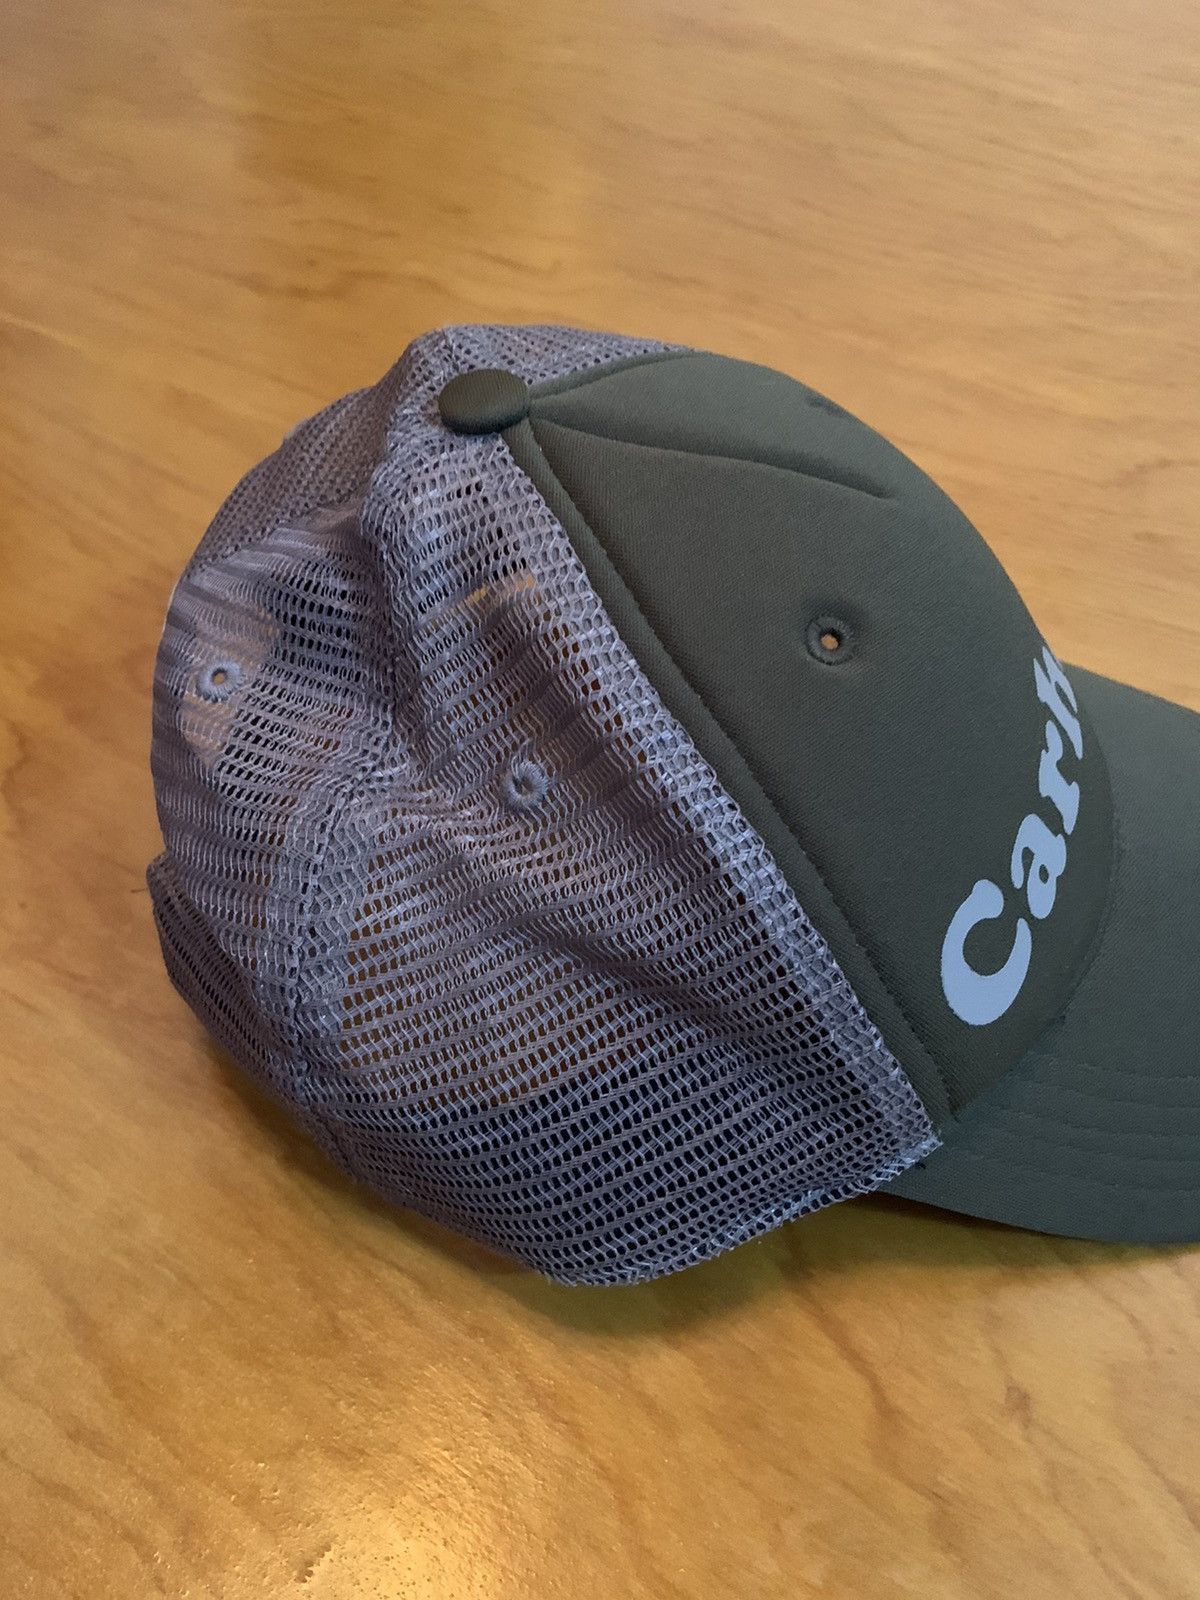 Carhartt Rare Carhartt Spell Out Trucker Hat Low Profile Size ONE SIZE - 7 Thumbnail